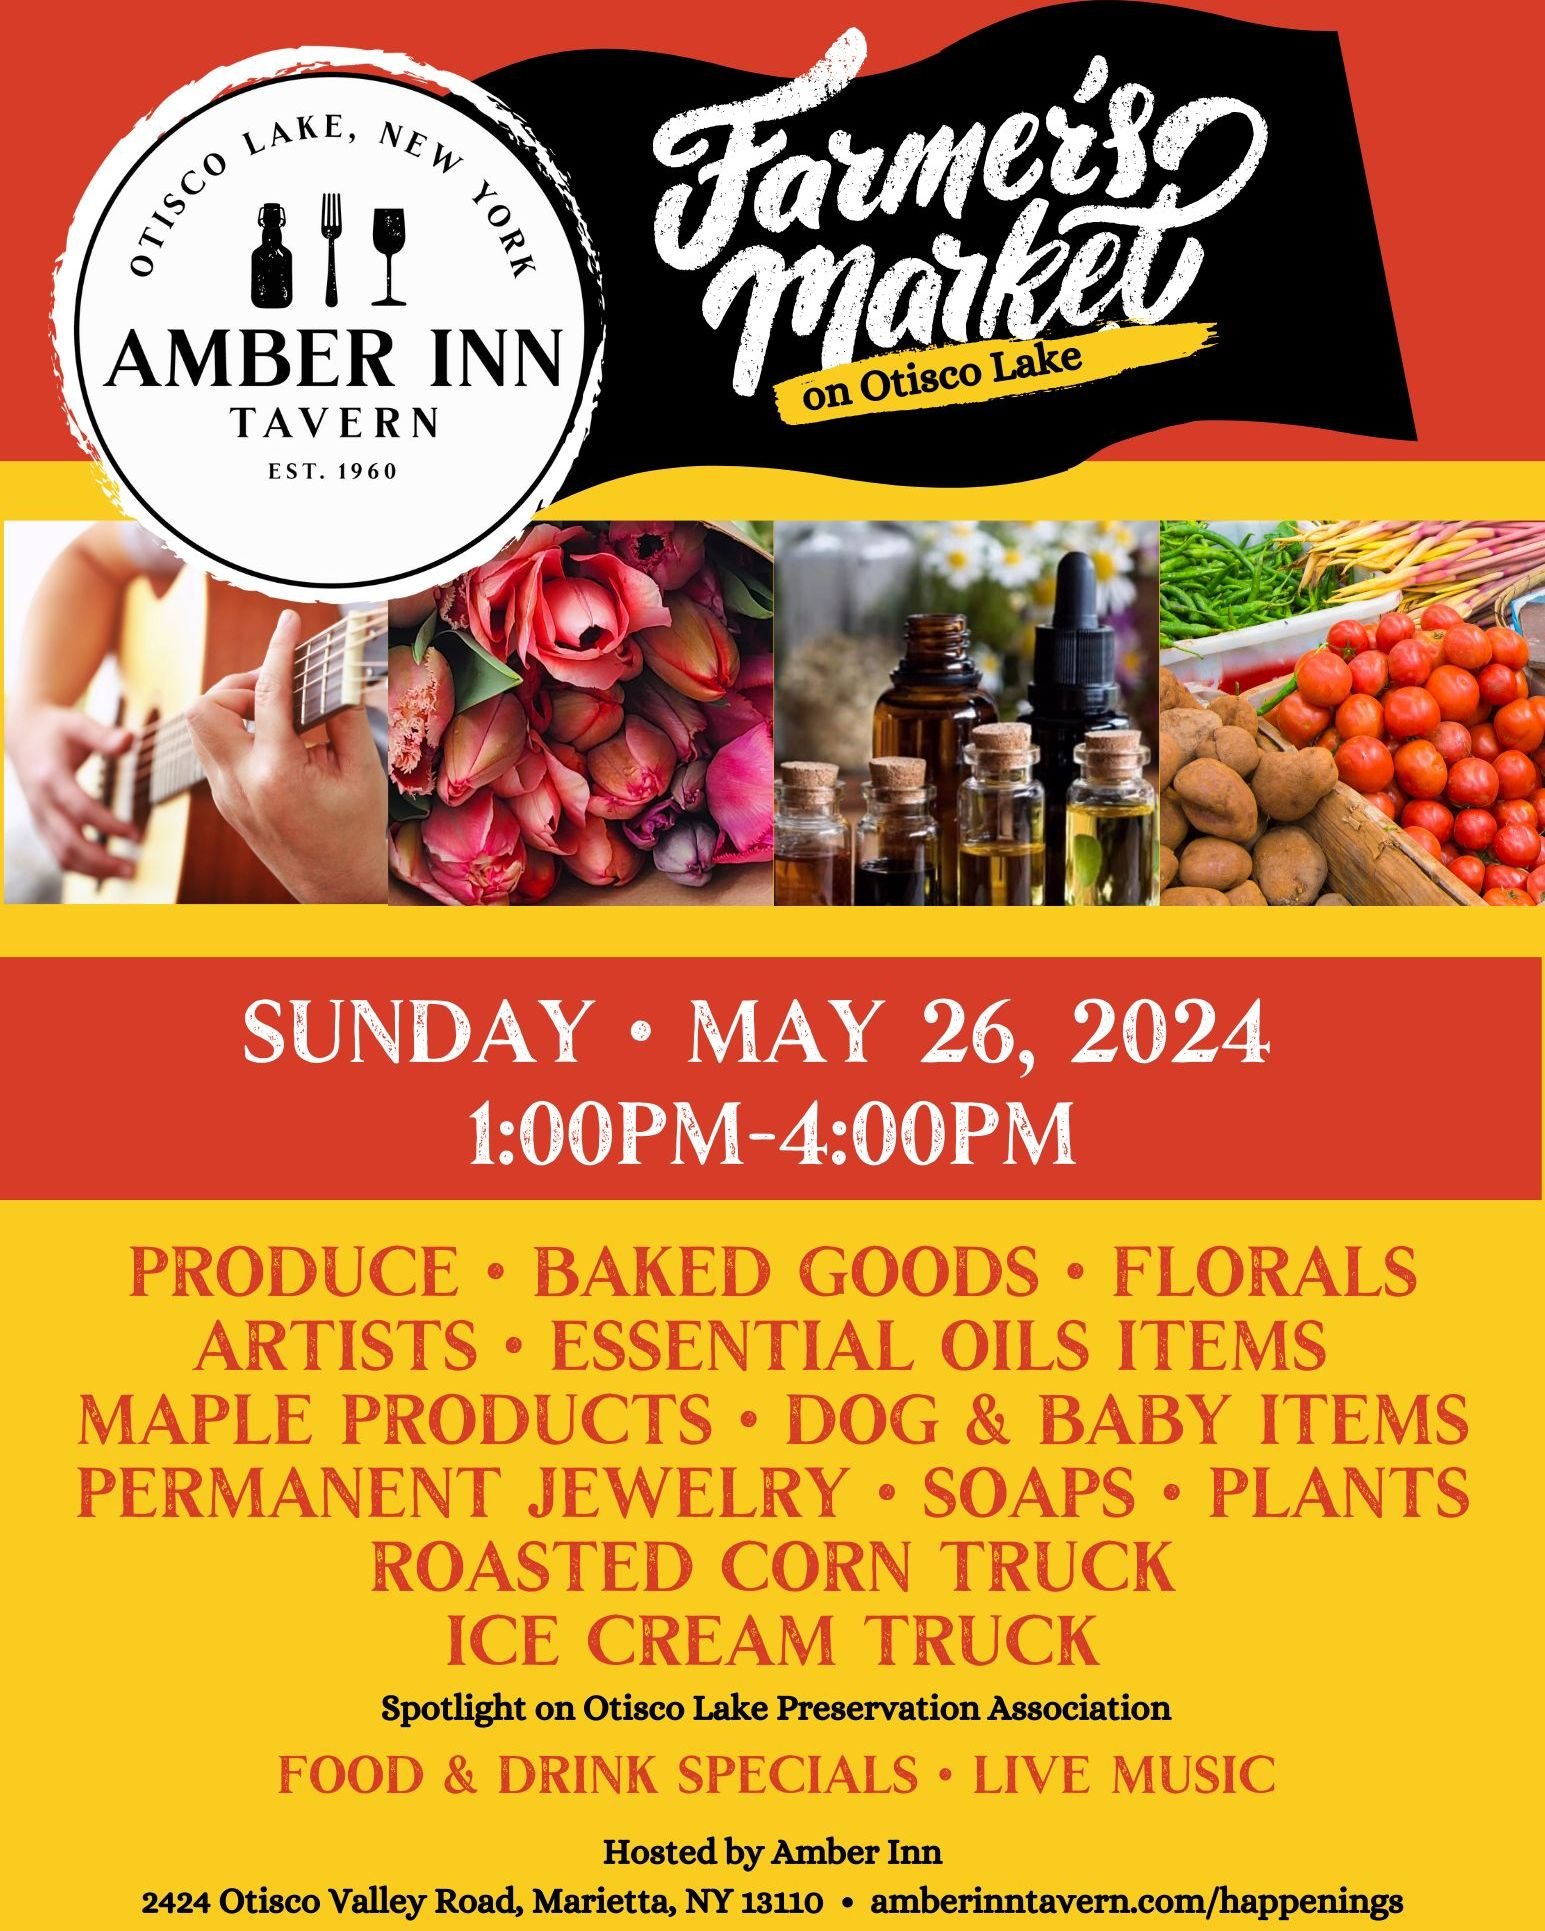 JOIN US THIS SUNDAY! Amber Inn's first Farmer's Market of 2024!

Sunday, May 26th at Amber Inn from 1-4 PM.

🎸 Live Music with @zacharyleeacoustix &amp; @ericaabdo_music 

#eatlocal #drinklocal #shoplocal #playlocal #supportlocal